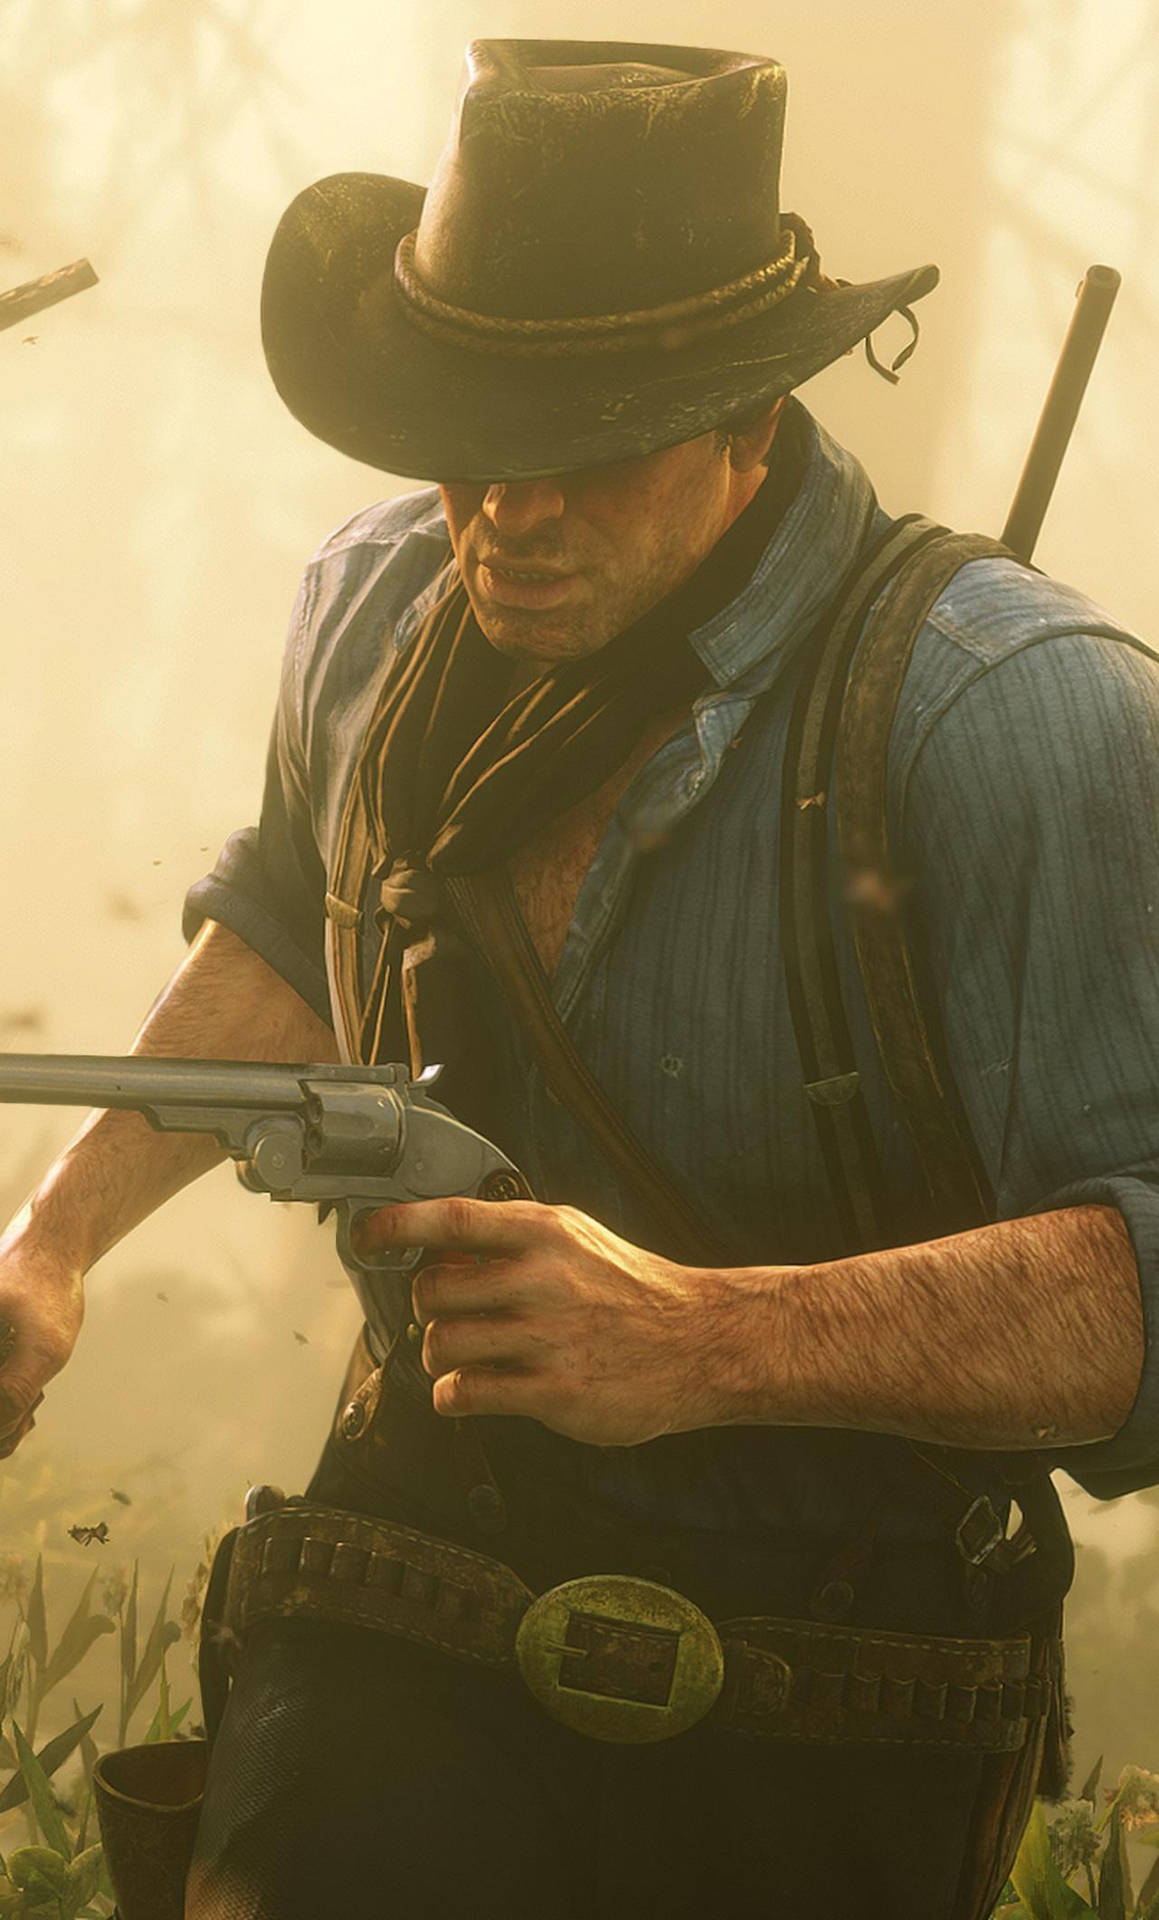 Arthur Morgan With Guns HD Red Dead Redemption 2 Wallpapers, HD Wallpapers